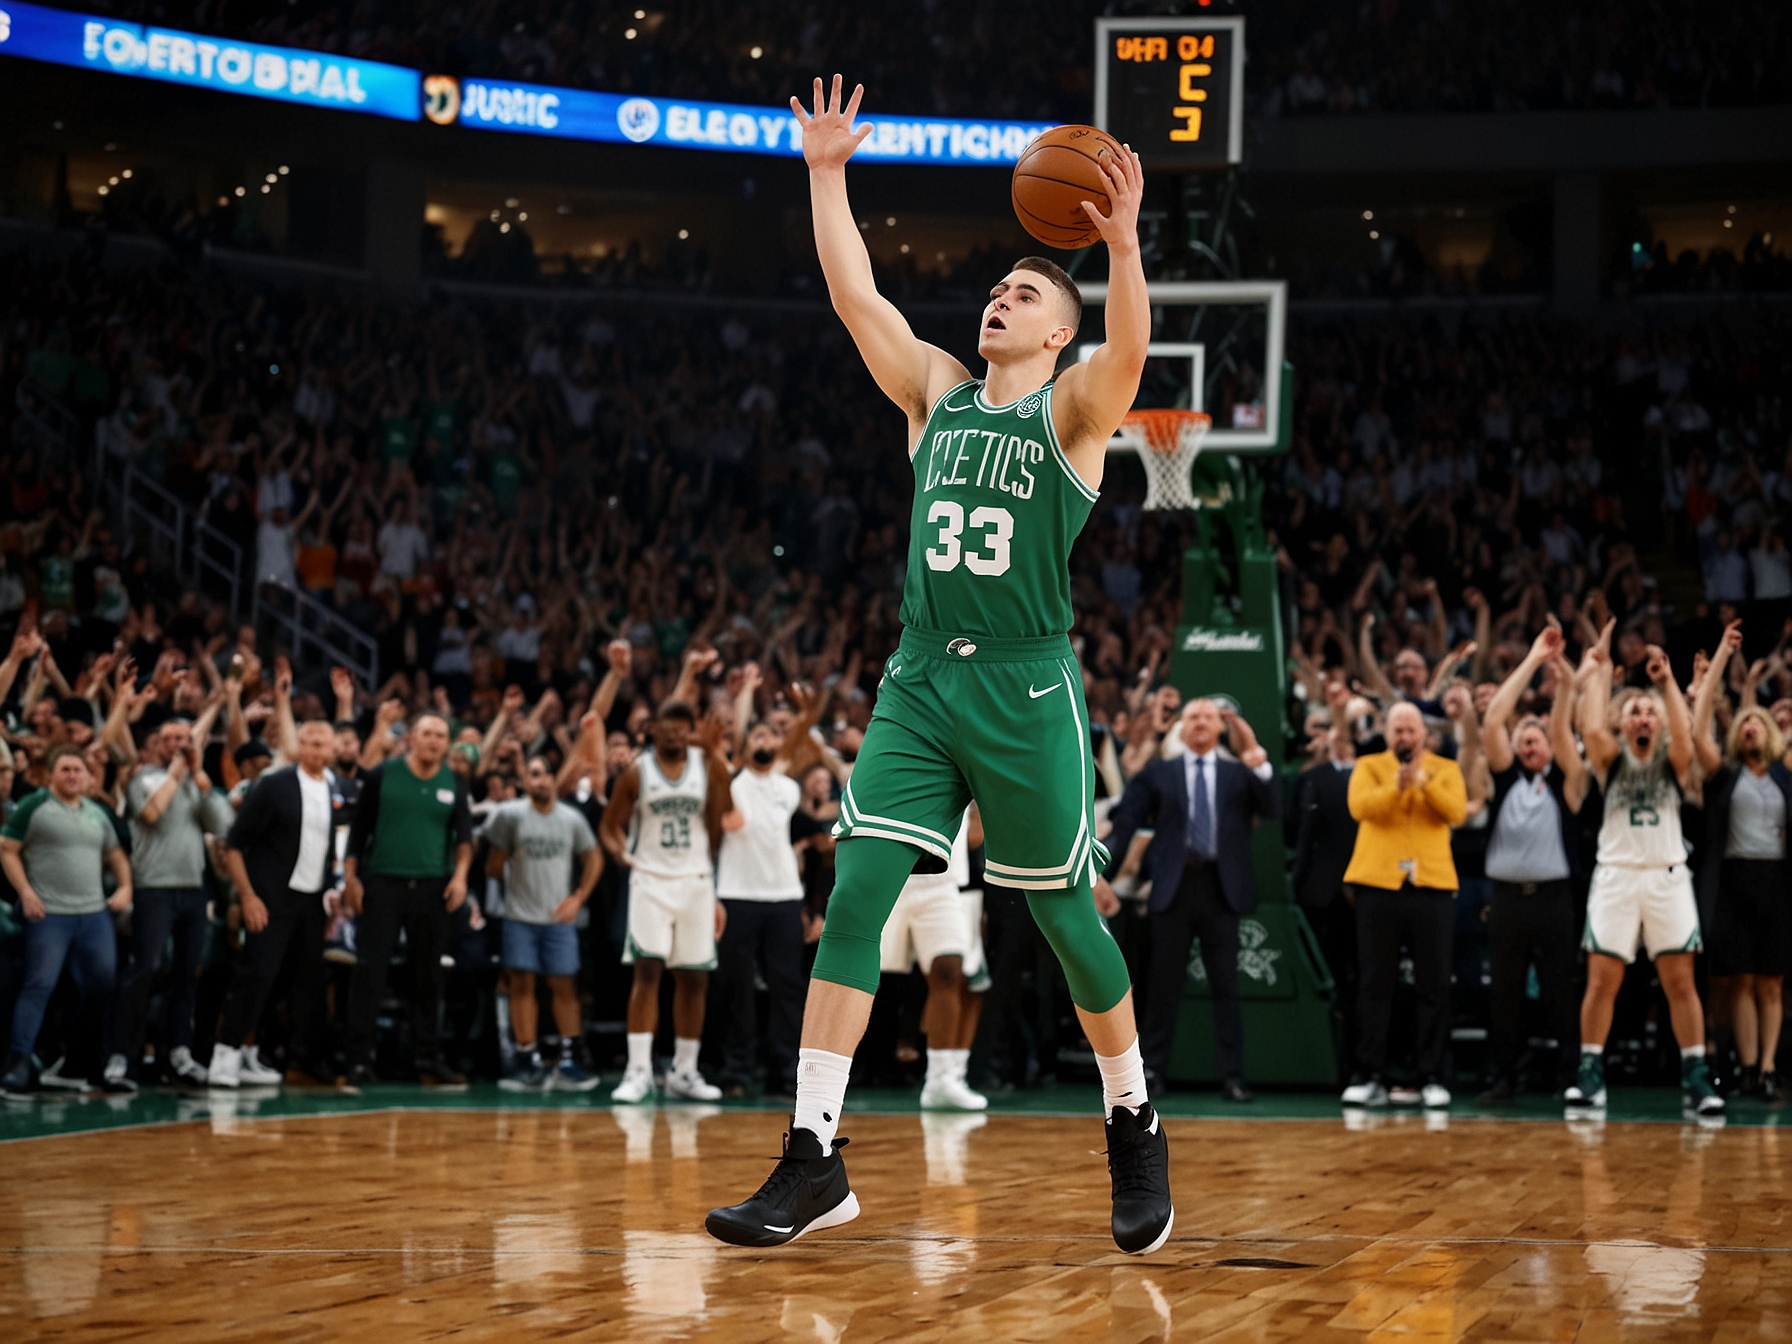 Boston Celtics' Payton Pritchard launches a high-arching 49-foot buzzer-beater shot during the NBA Finals, moments before the ball swishes through the net, igniting wild cheers from the crowd.